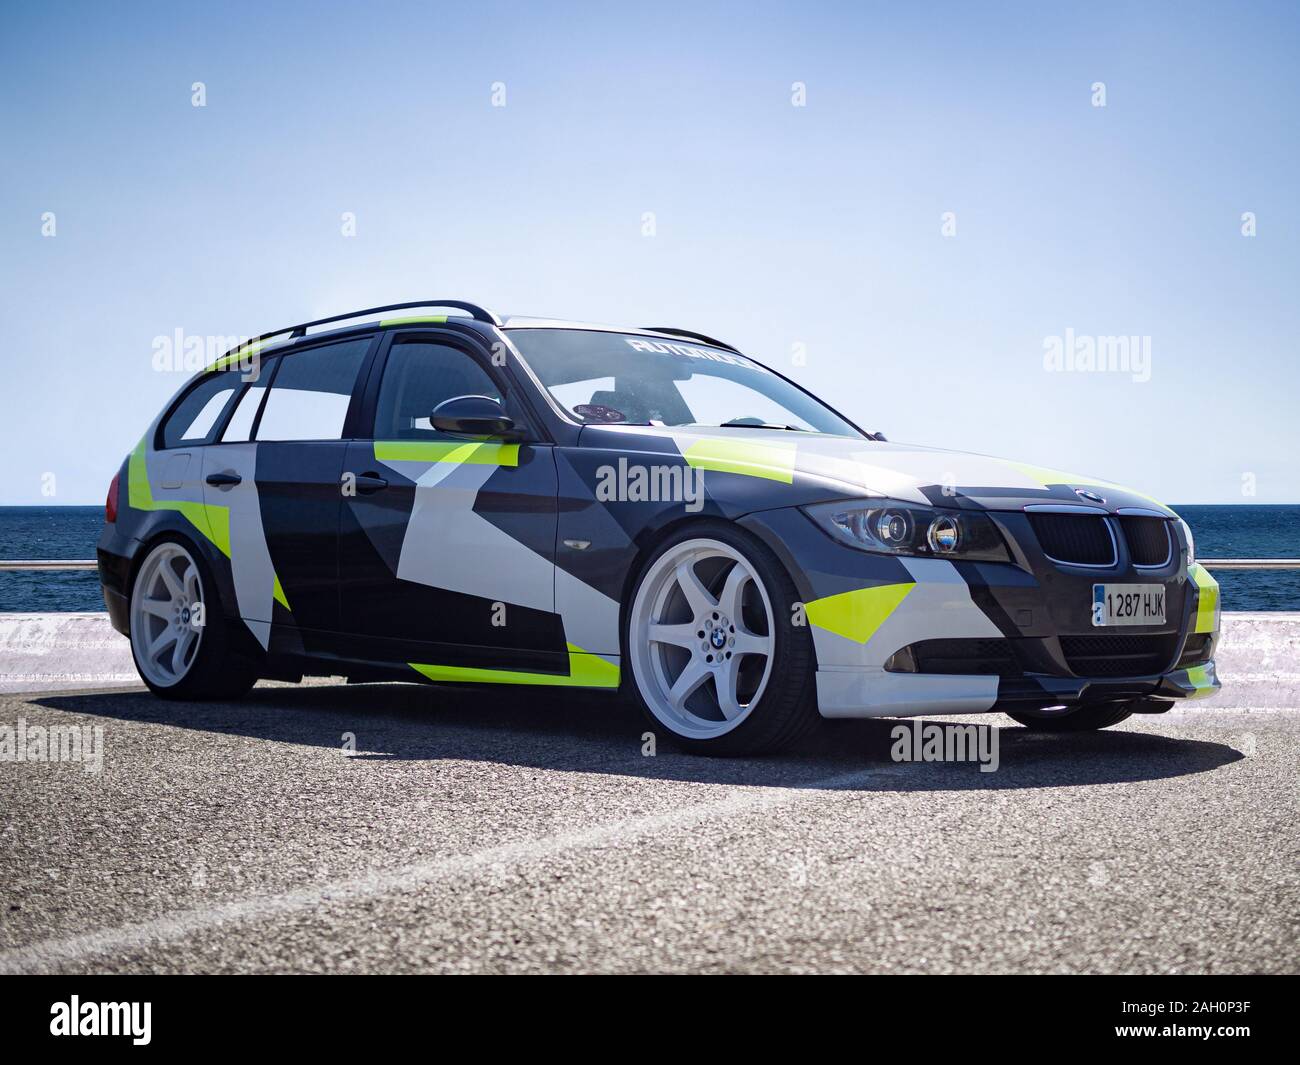 Bmw e91 hi-res stock photography and images - Alamy